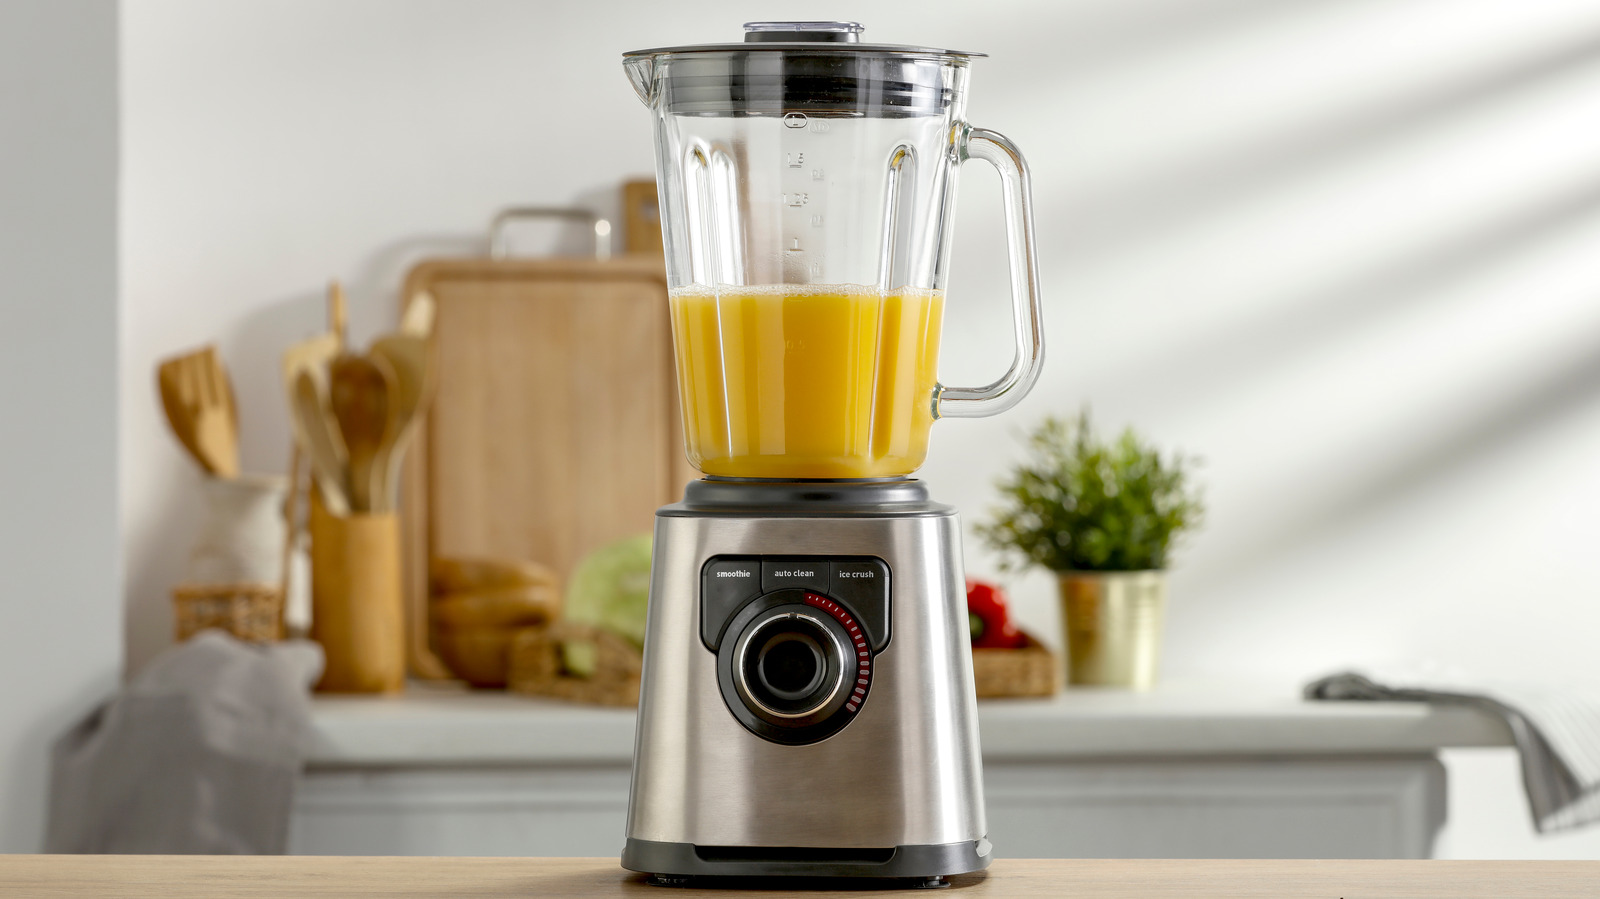 https://www.tastingtable.com/img/gallery/the-foolproof-method-to-safely-clean-your-blender/l-intro-1661455831.jpg